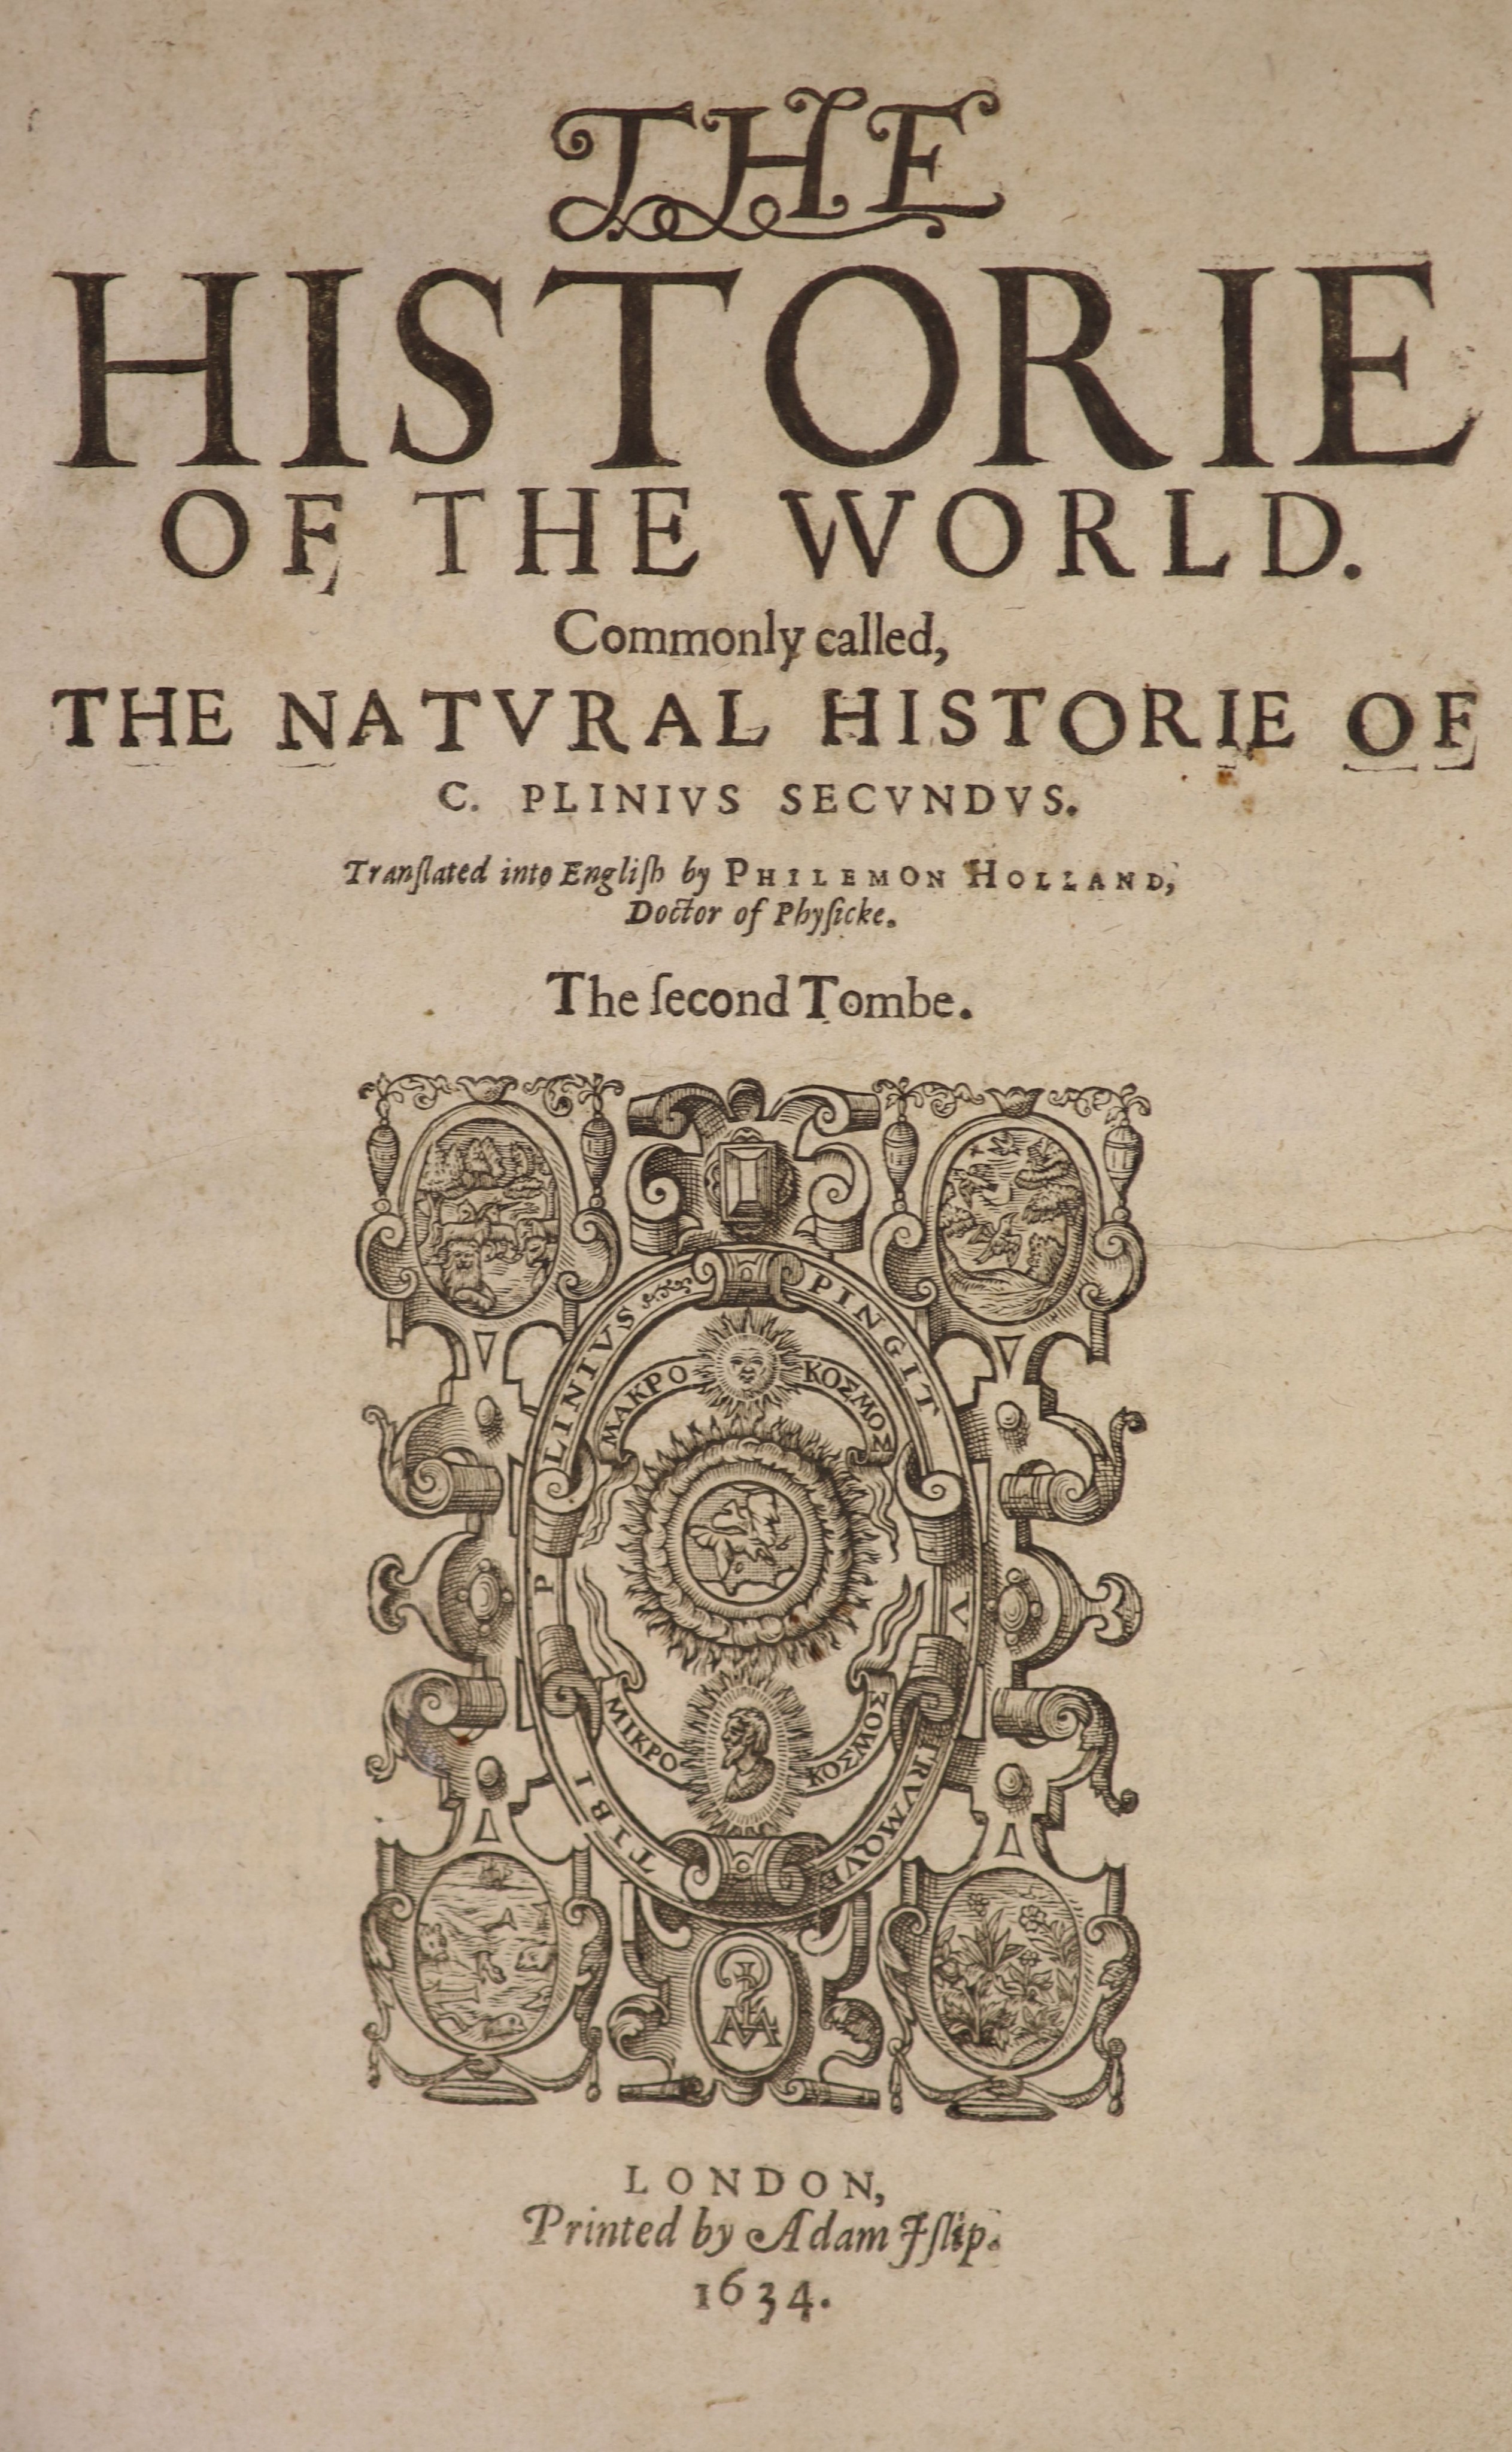 Pliny - The Historie of the World: commonly called, The Naturall Historie of C. Plinius Secundus. Translated into English by Philemon Holland. (2 vols), engraved device on titles